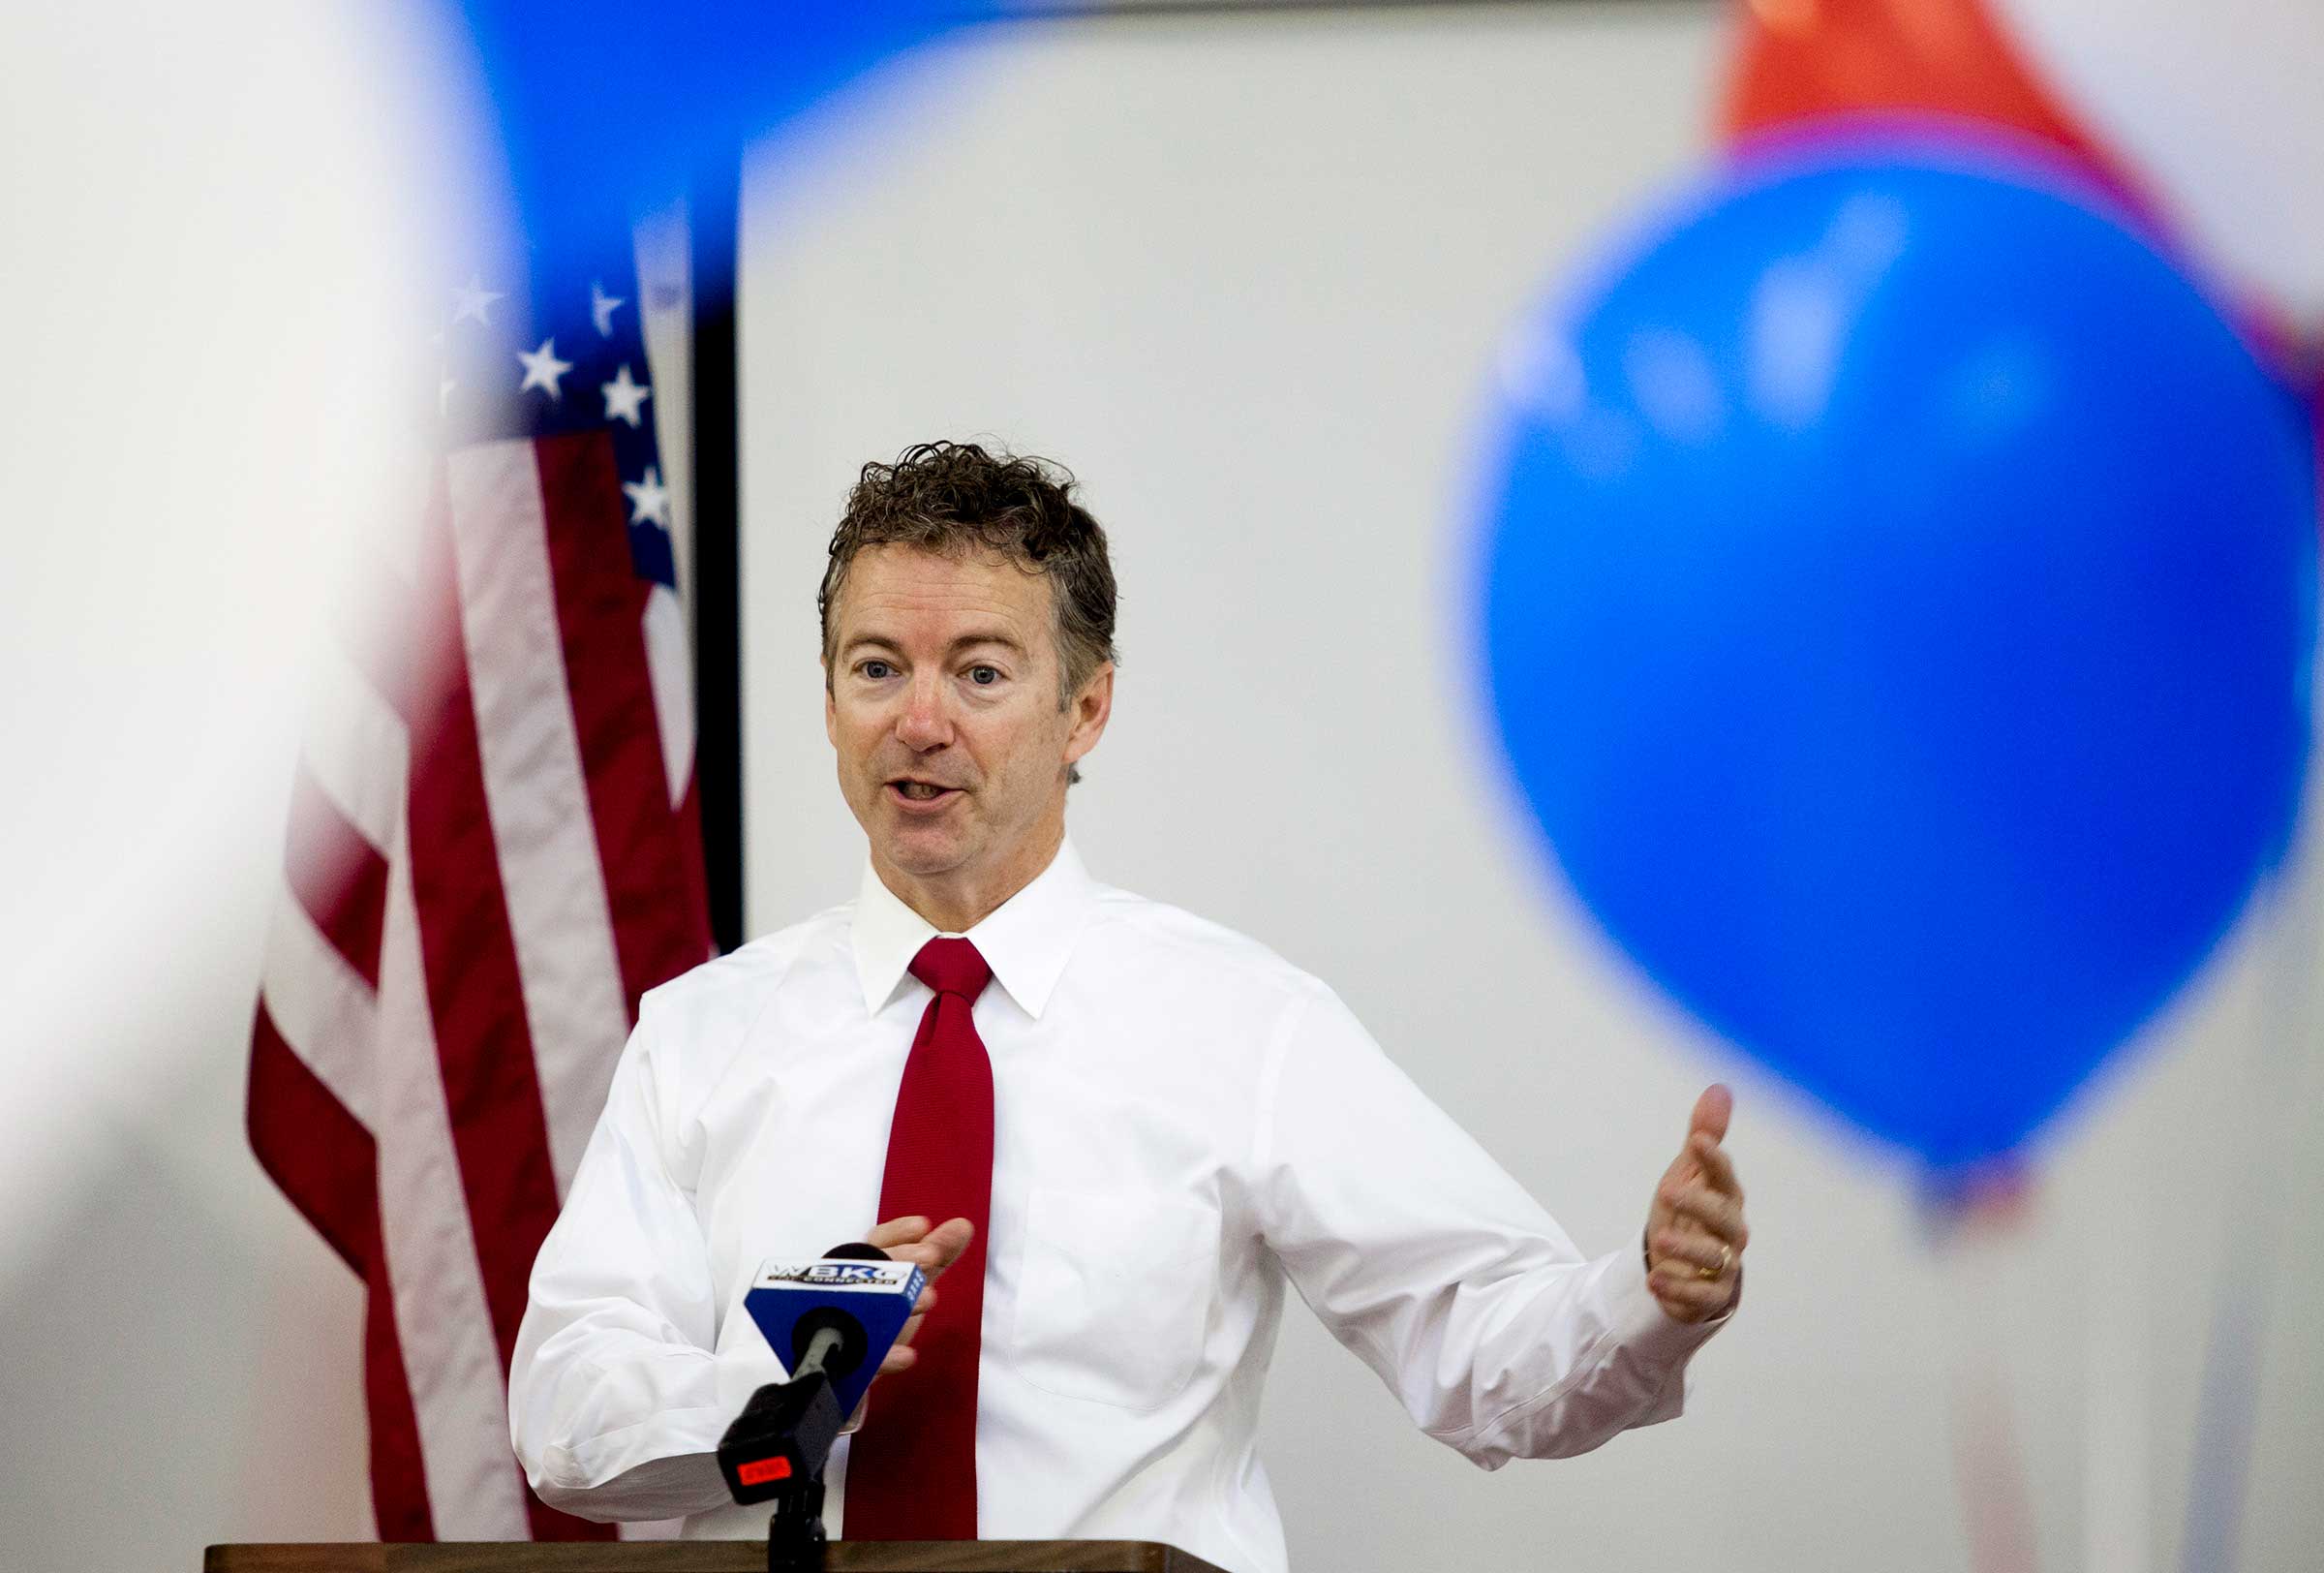 Sen. Rand Paul (R-Ky.) gives a speech on Monday, March 23, 2015, at the Associated Builders and Contractors of Indiana/ Kentucky office in Bowling Green, Ky. (Austin Anthony—AP)